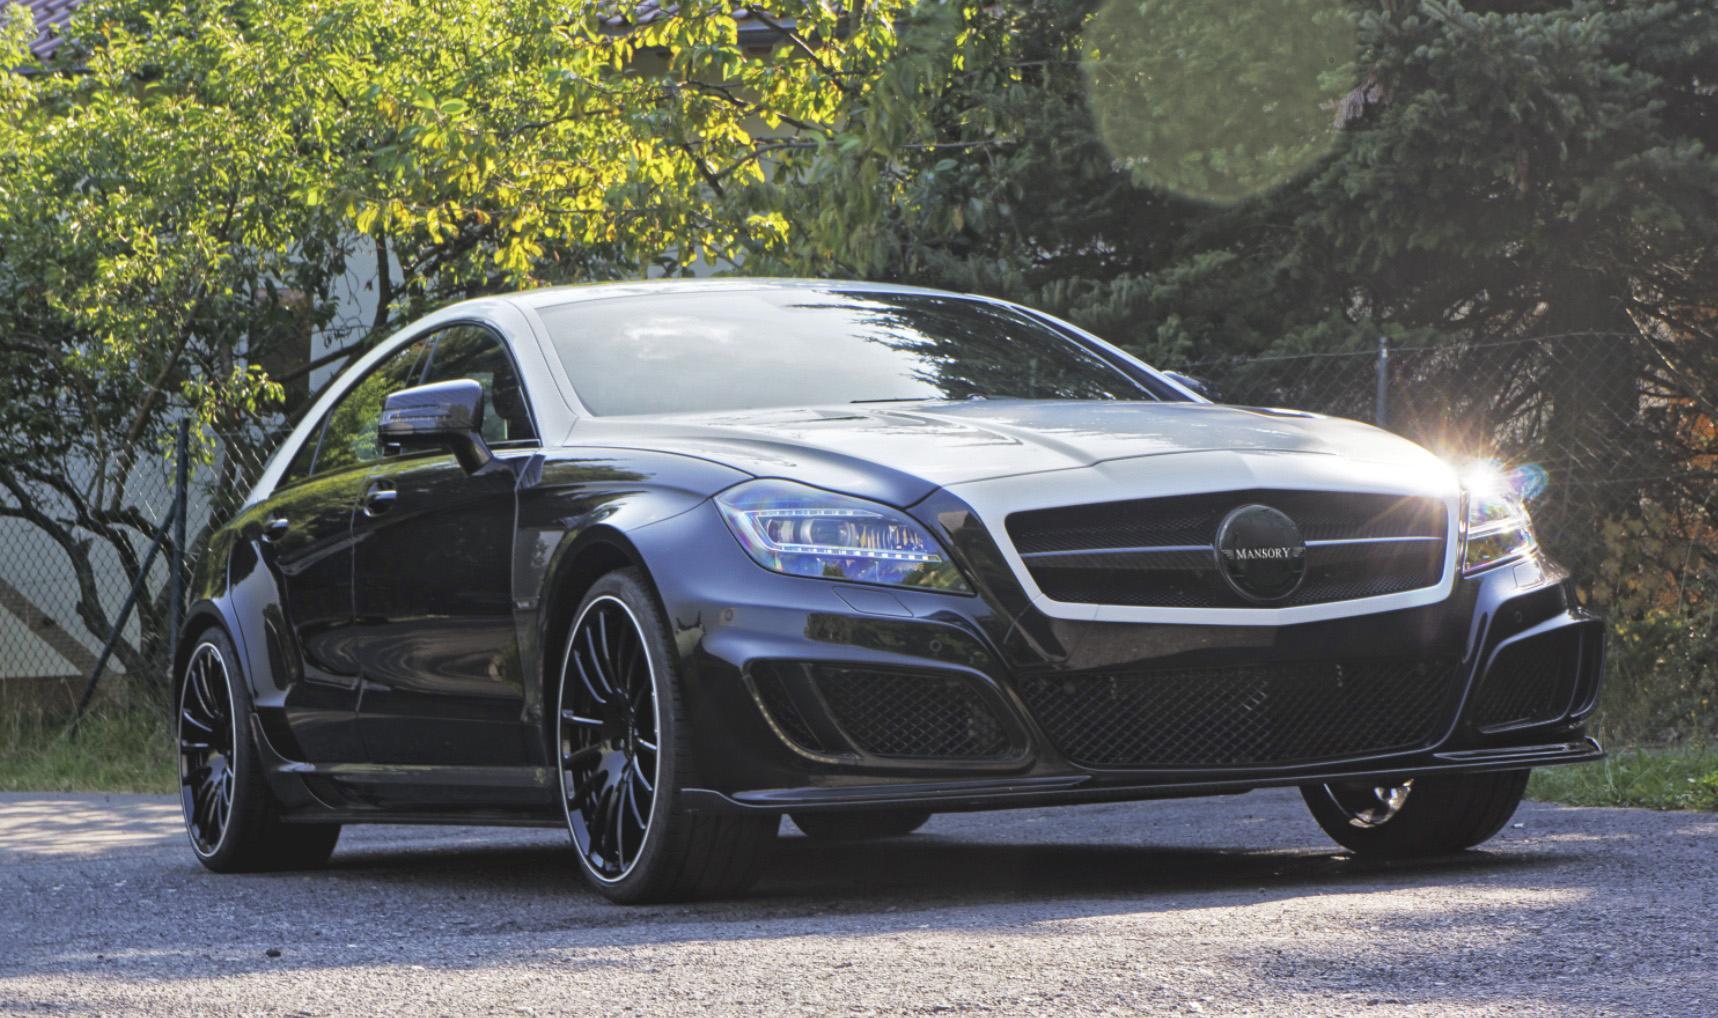 Mansory body kit for Mercedes-Benz CLS latest model